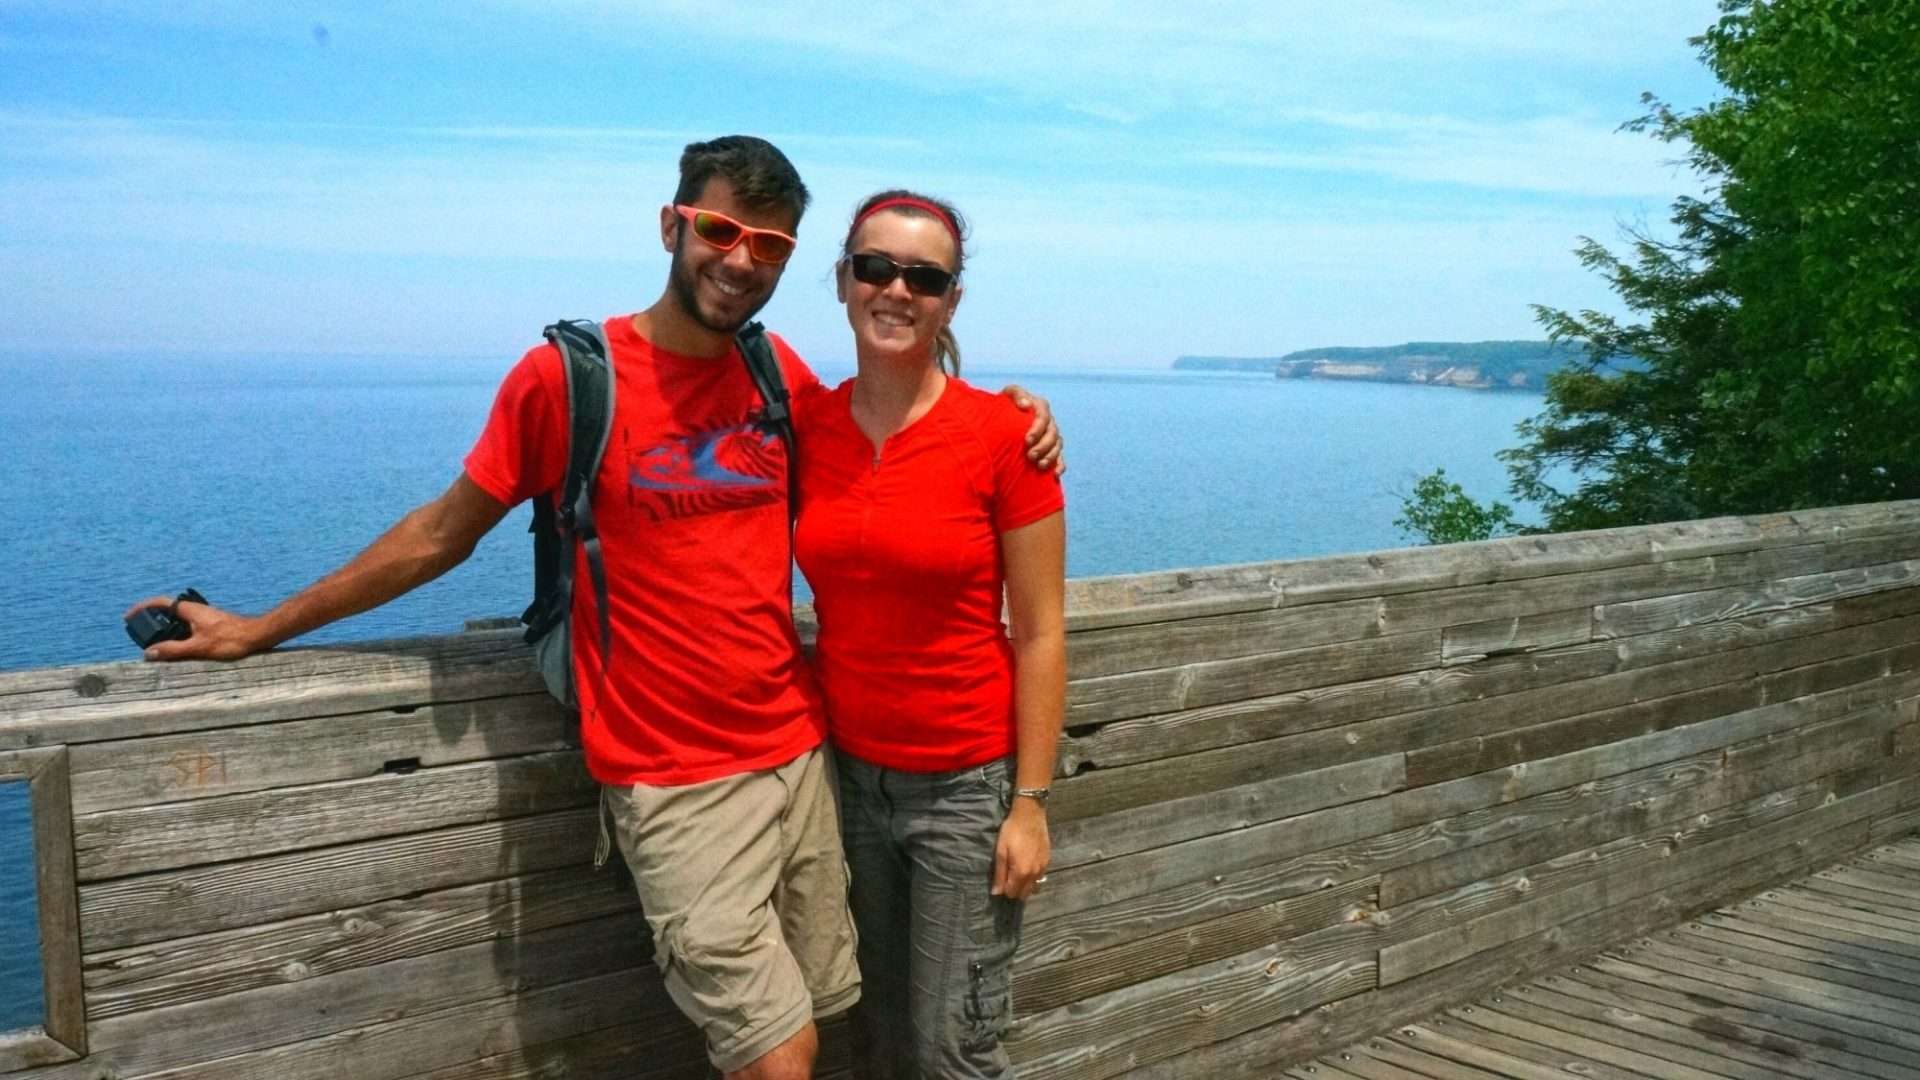 Tom and Cait at Pictured Rocks National Lakeshore